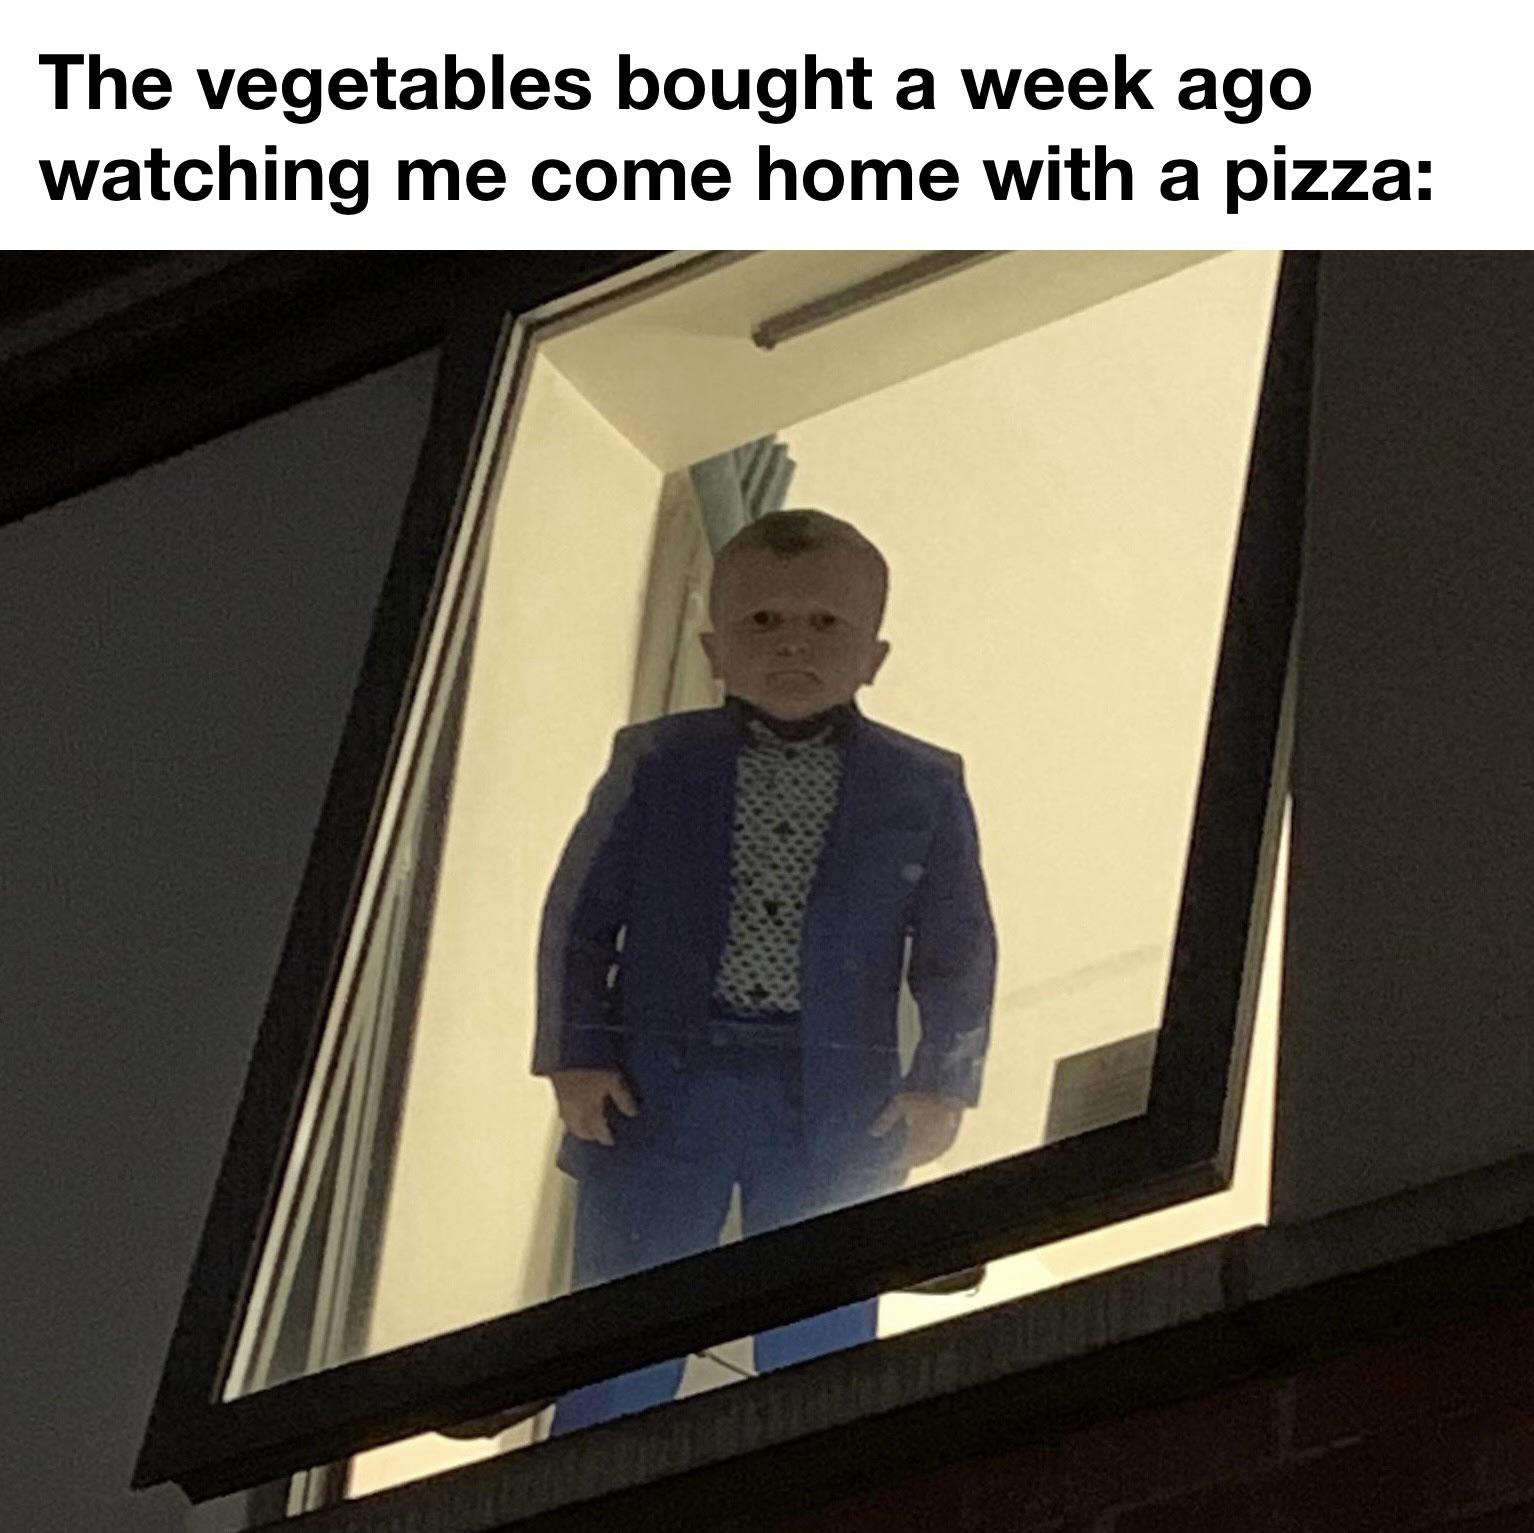 dank memes - presentation - The vegetables bought a week ago watching me come home with a pizza